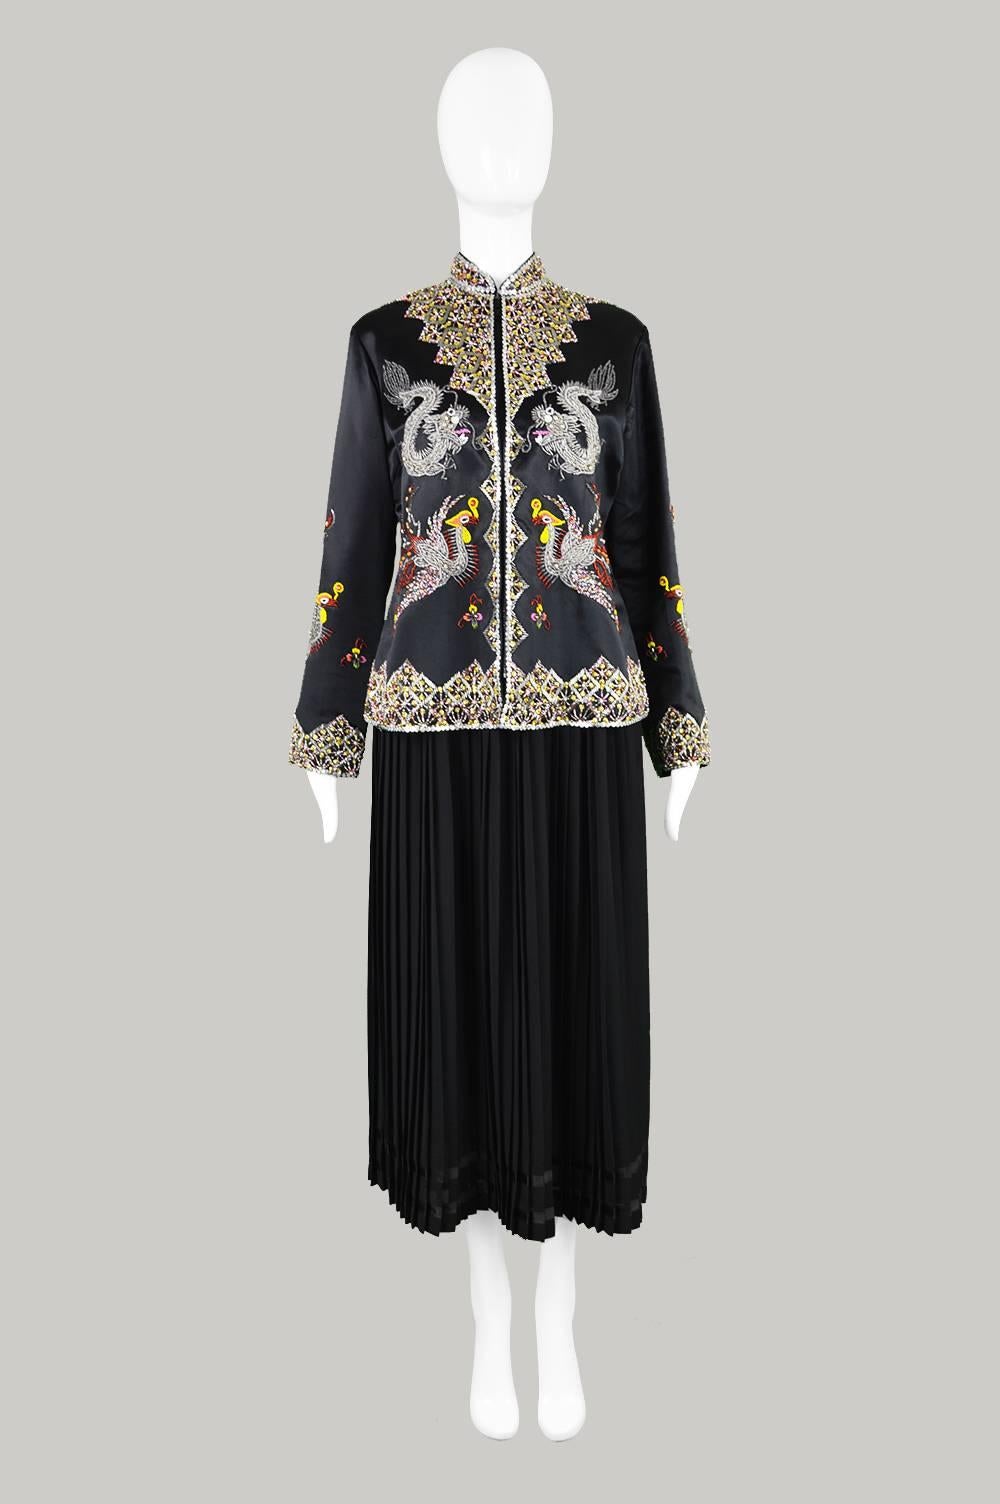 An incredible oriental inspired vintage jacket from the 1960s by high quality and very collectible label, Dynasty. These hand beaded garments from the British crown colony of Hong Kong are so sought after for their quality and luxurious feel.